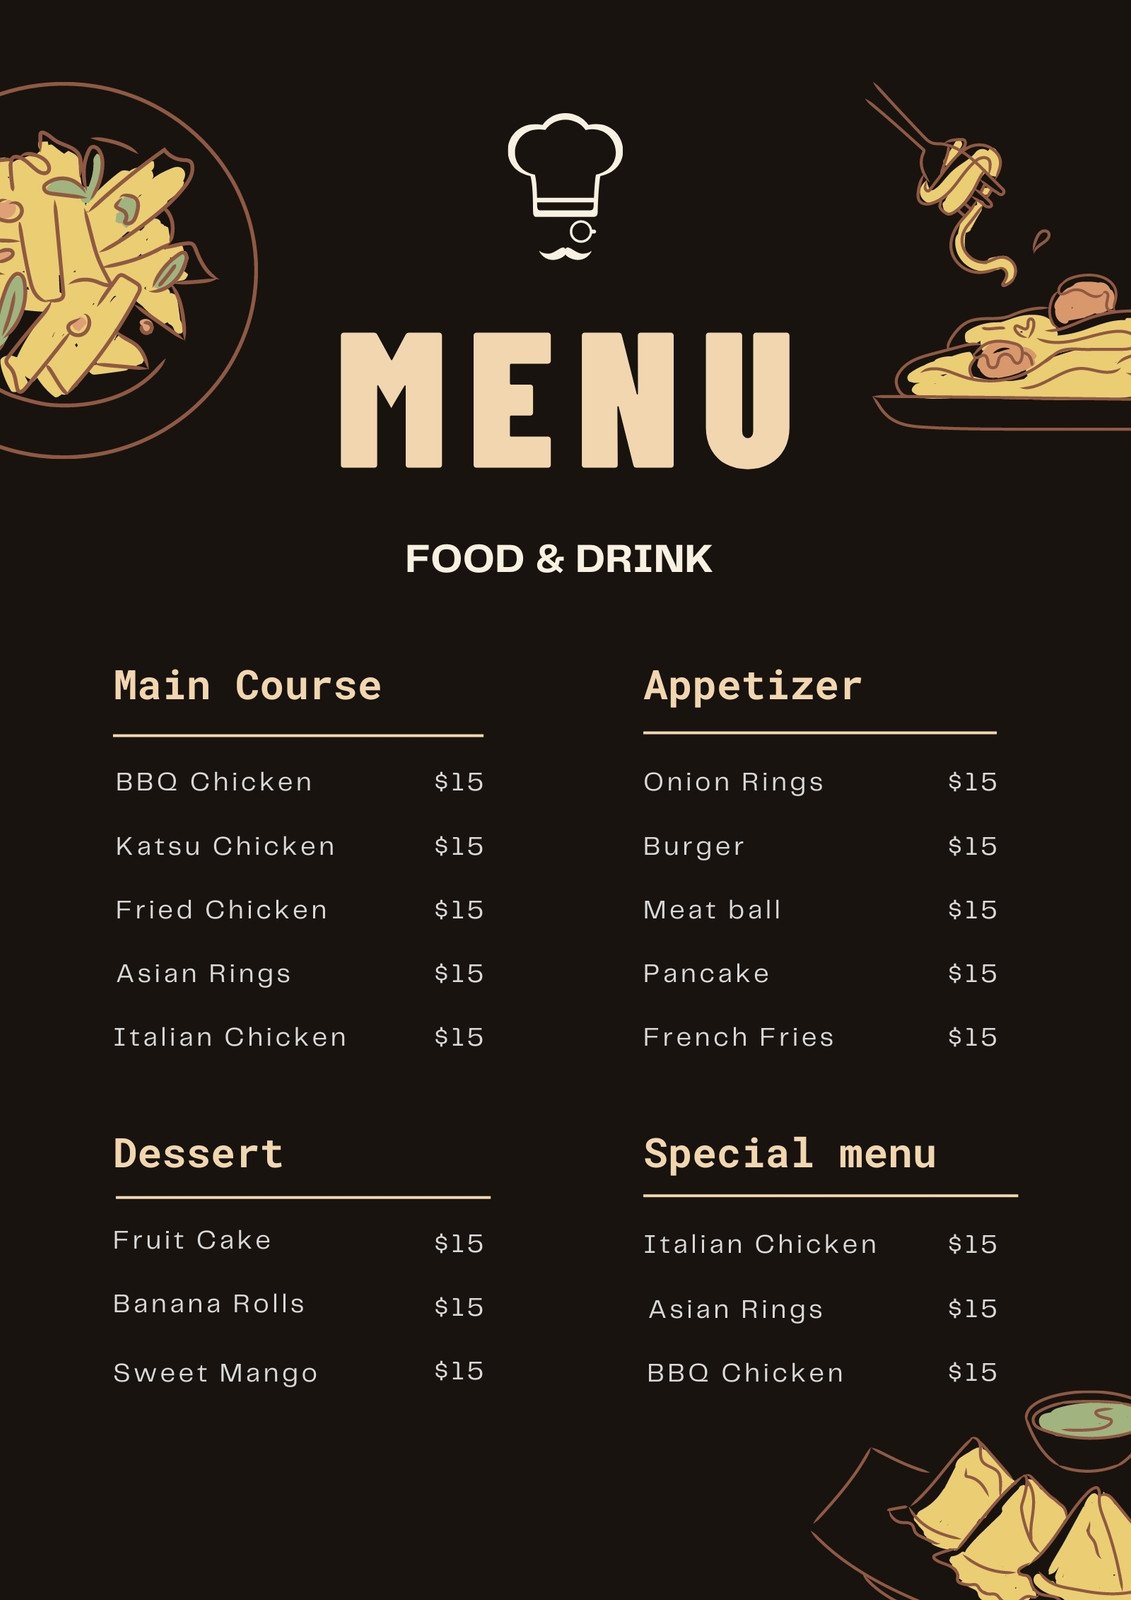 Yellow Black Photo Lunch Weekly Menu - Templates by Canva